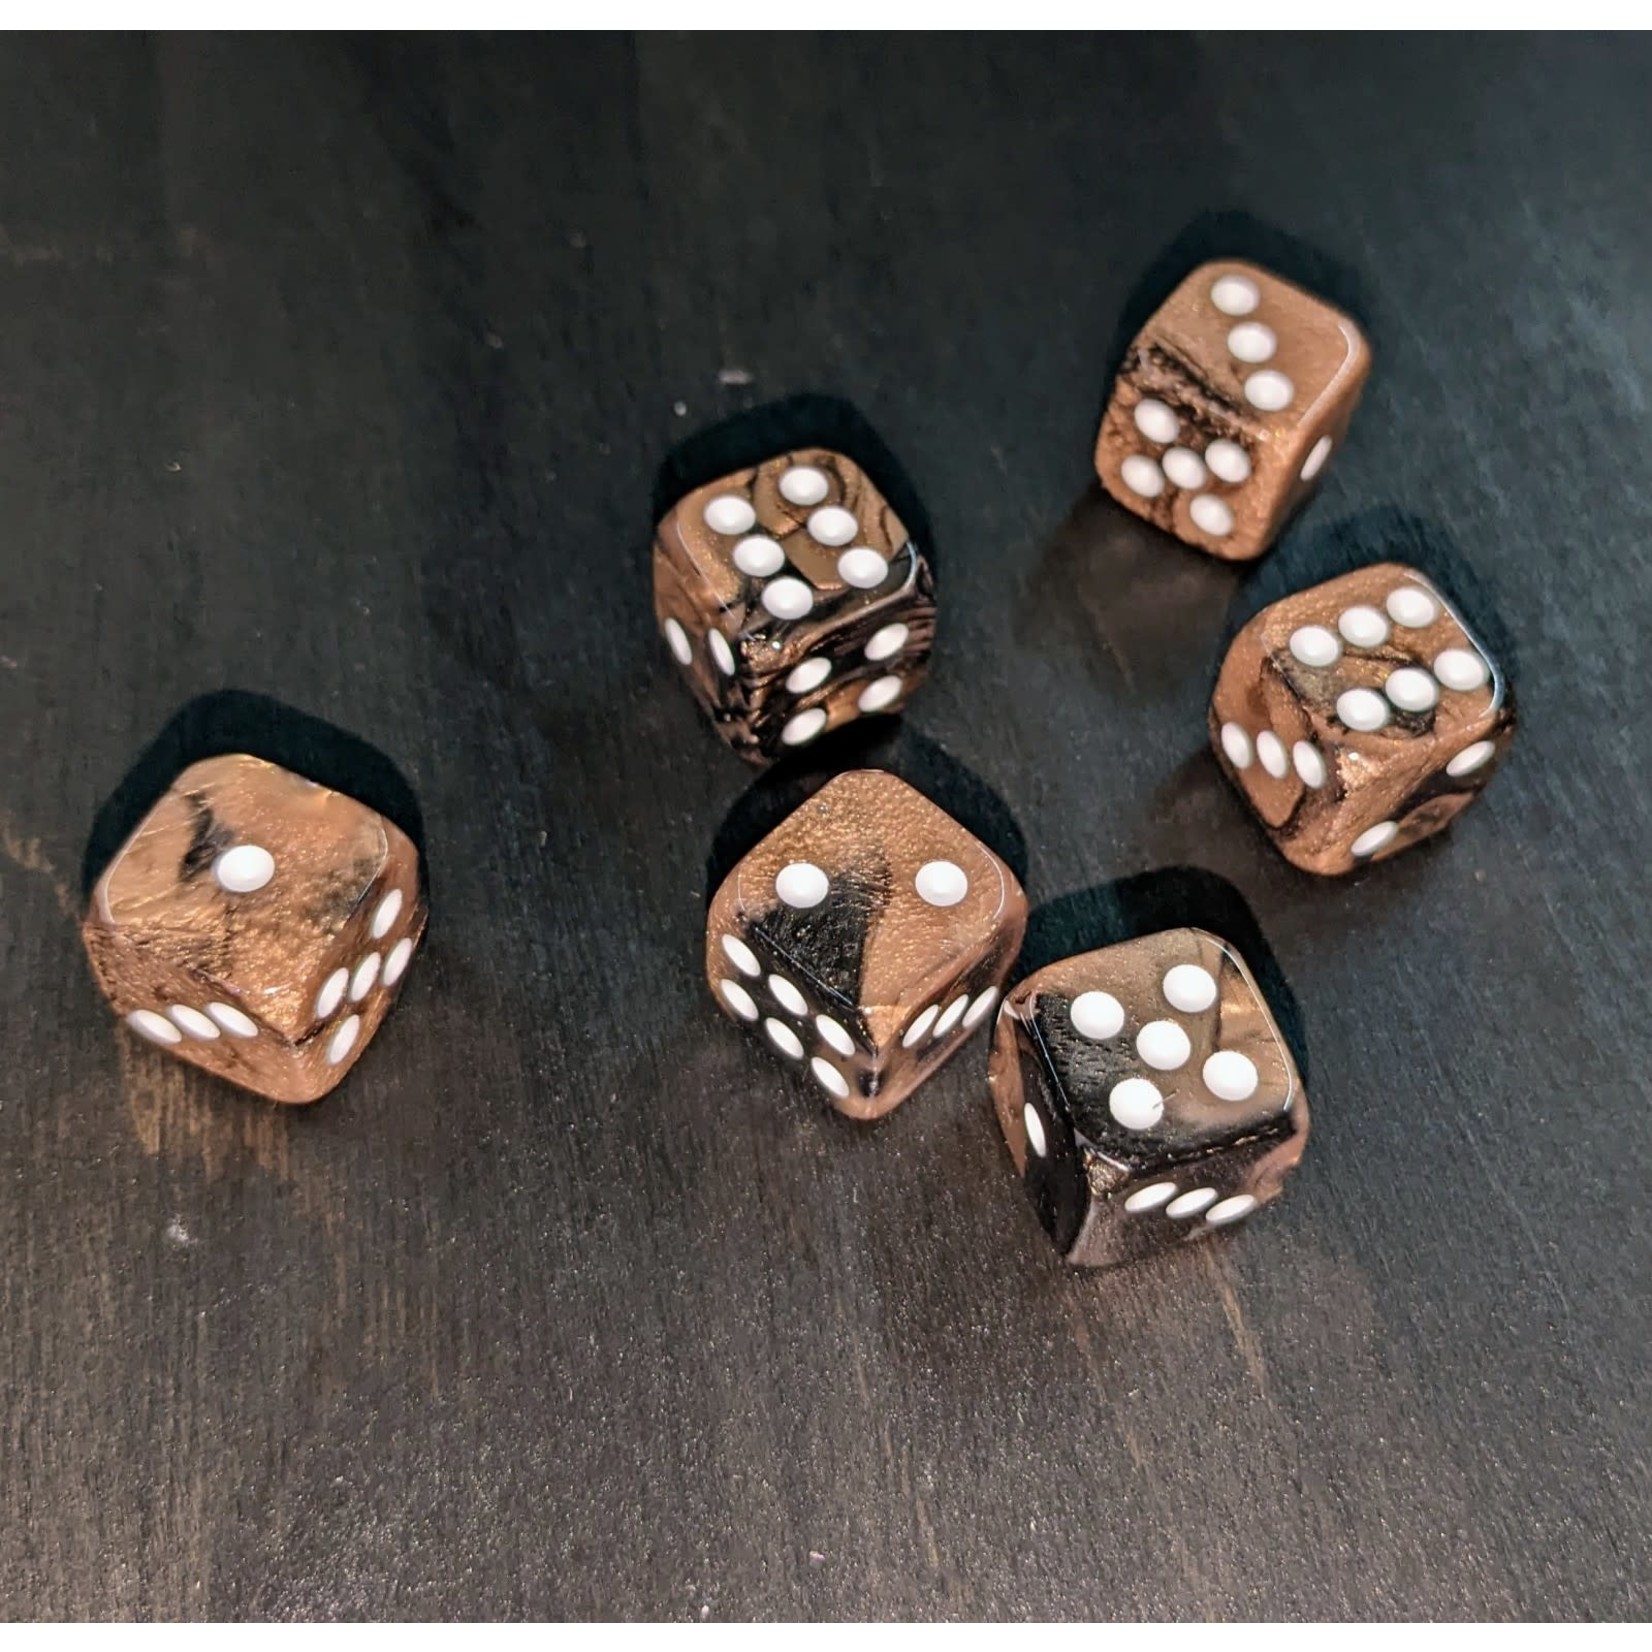 Die Hard Dice Vanguard 30-Pack of D6 Dice: Nocturne and Spice